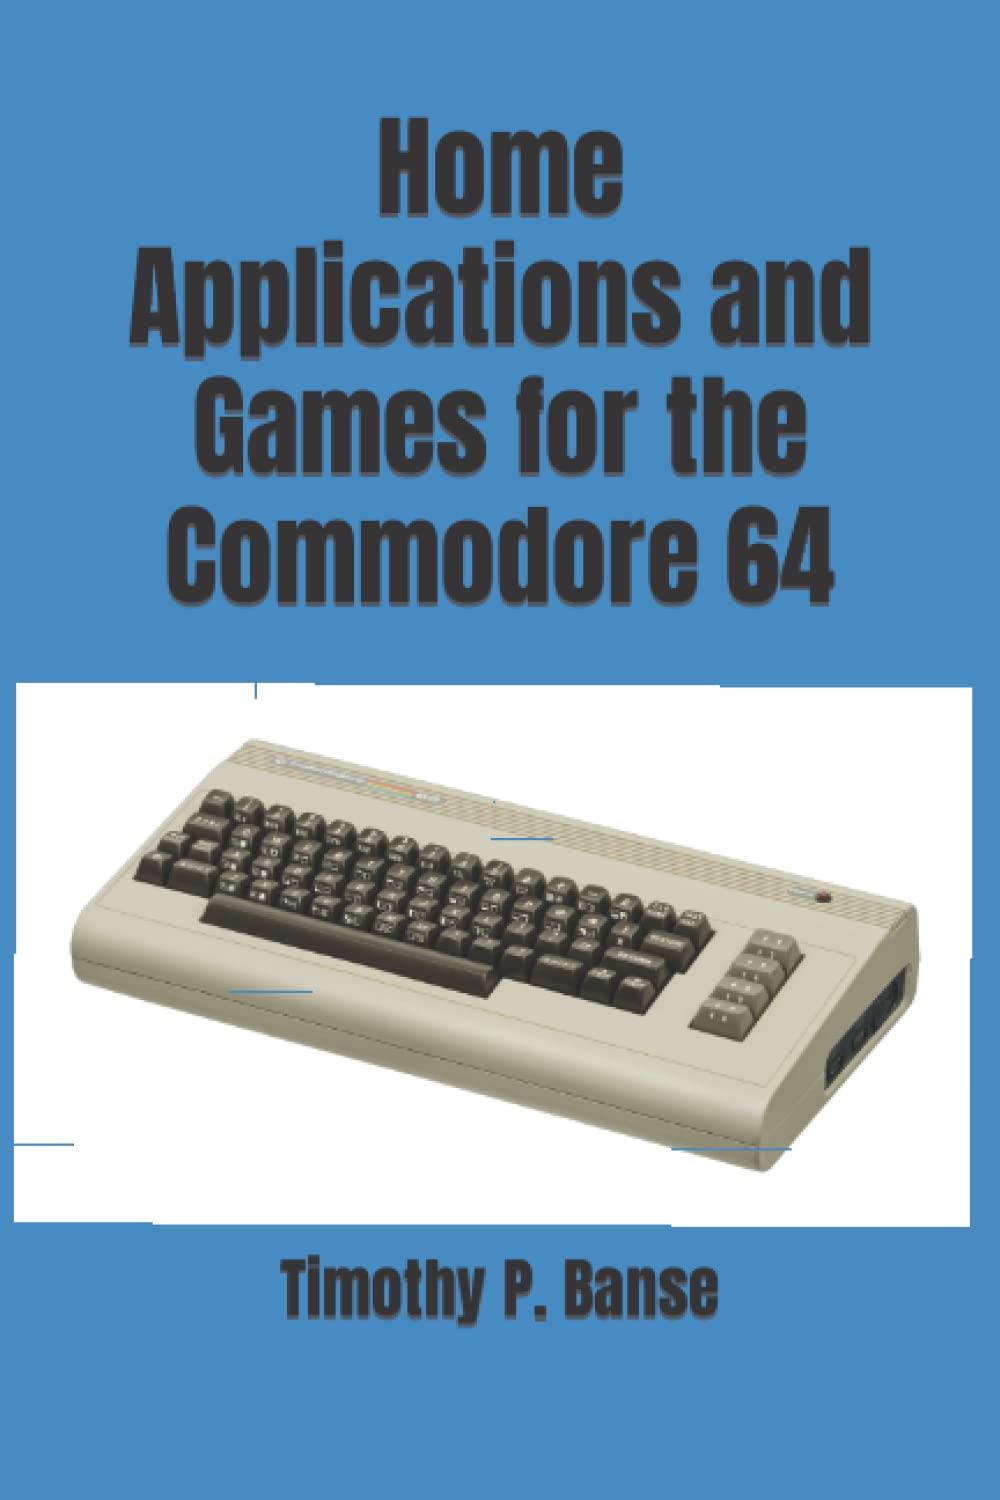 Home Applications And Games For The Commodore